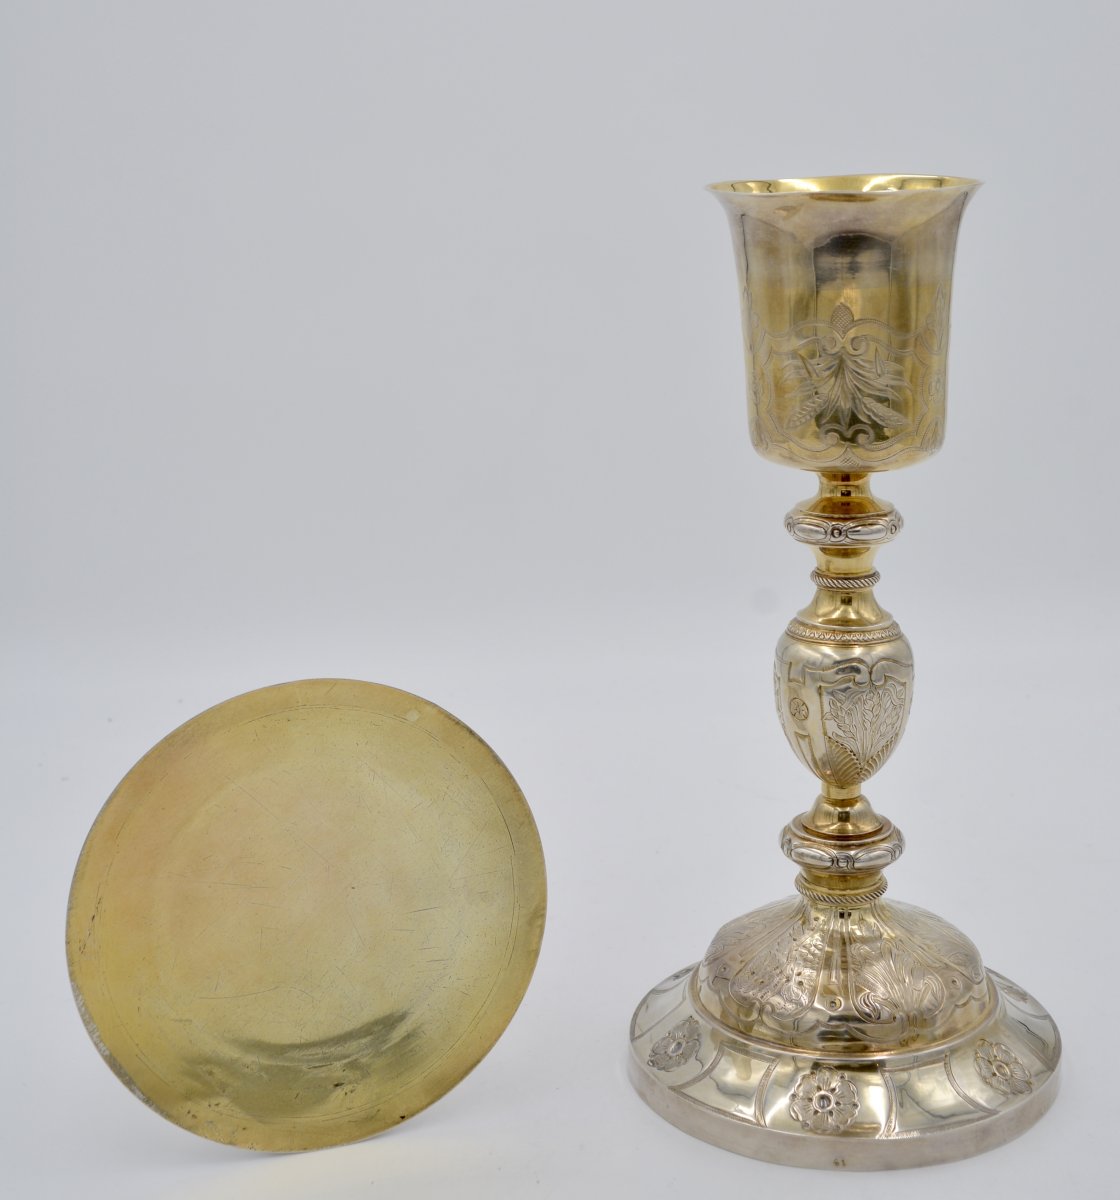 Chalice In Golden Silver And Paten In Silver, France Beginning Of XIXth Century